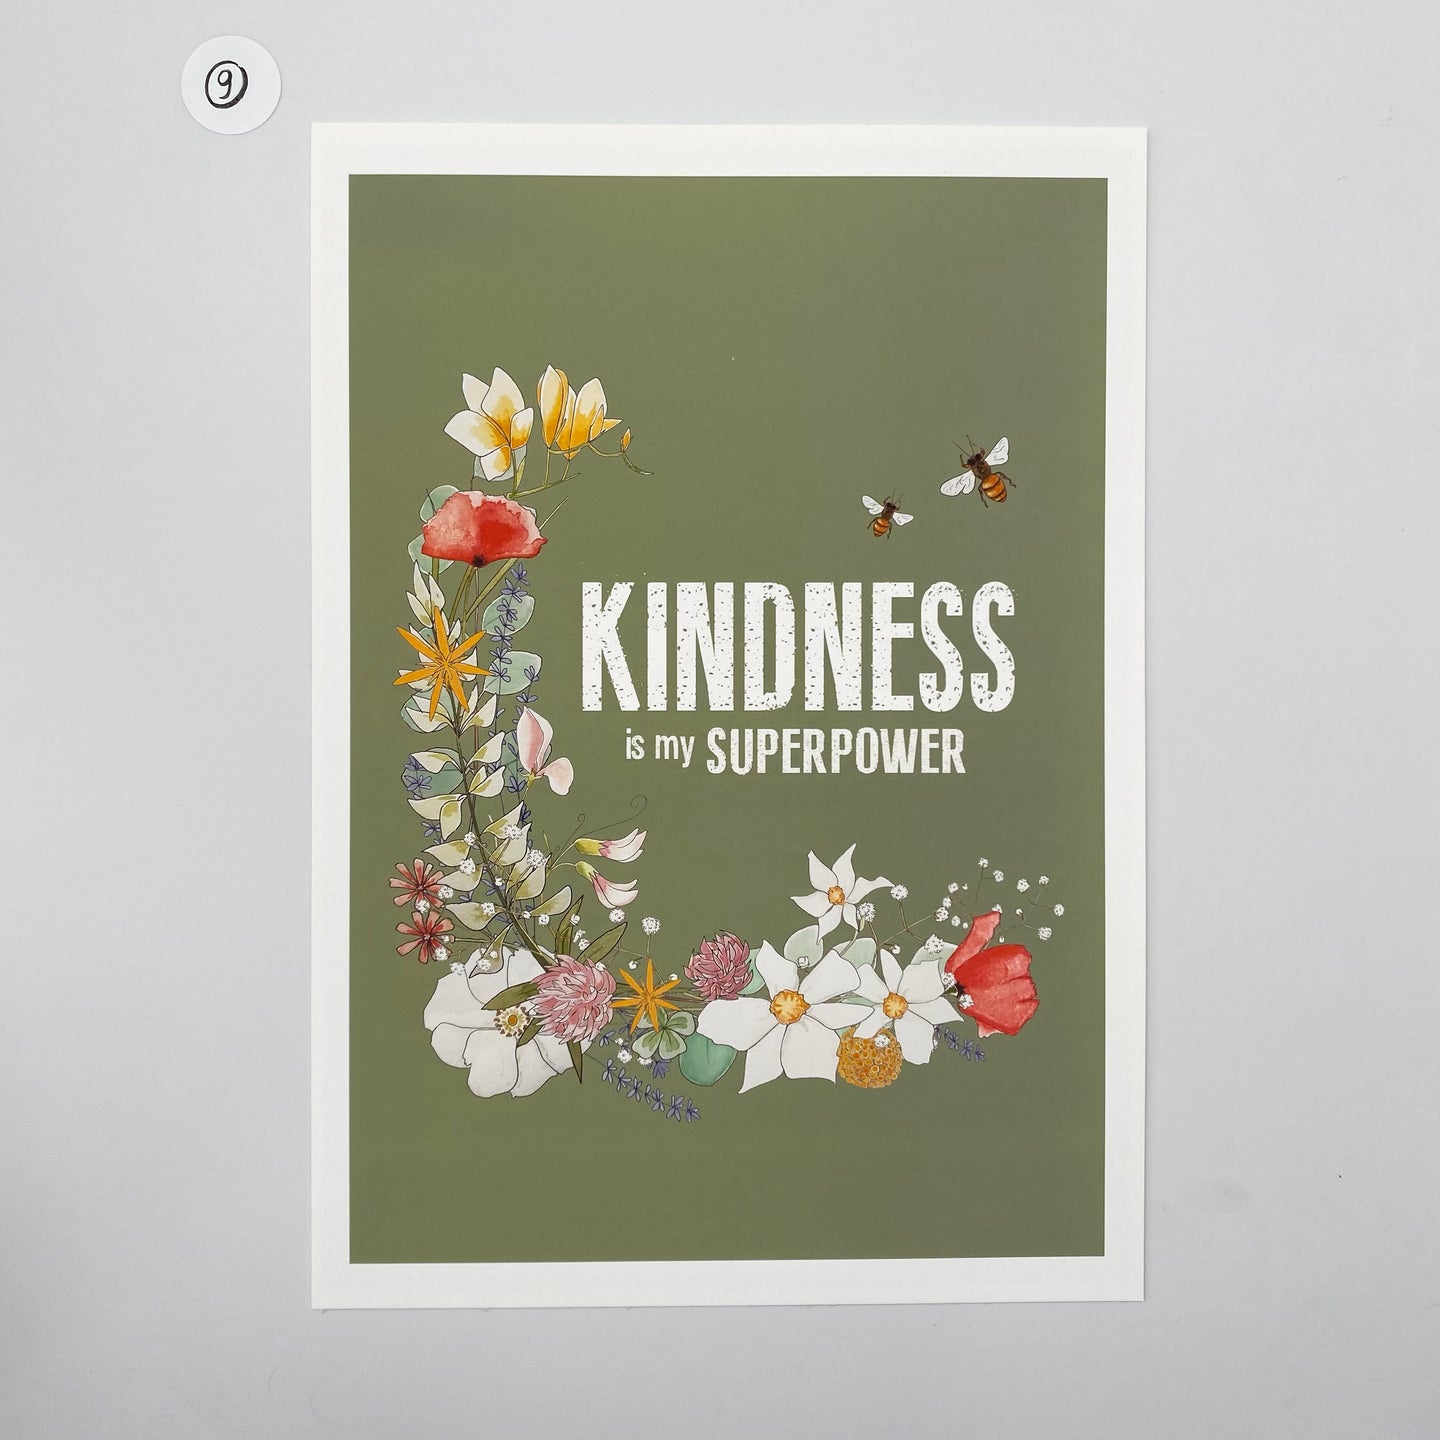 Outlet 9: Kindness is my Superpower - A4